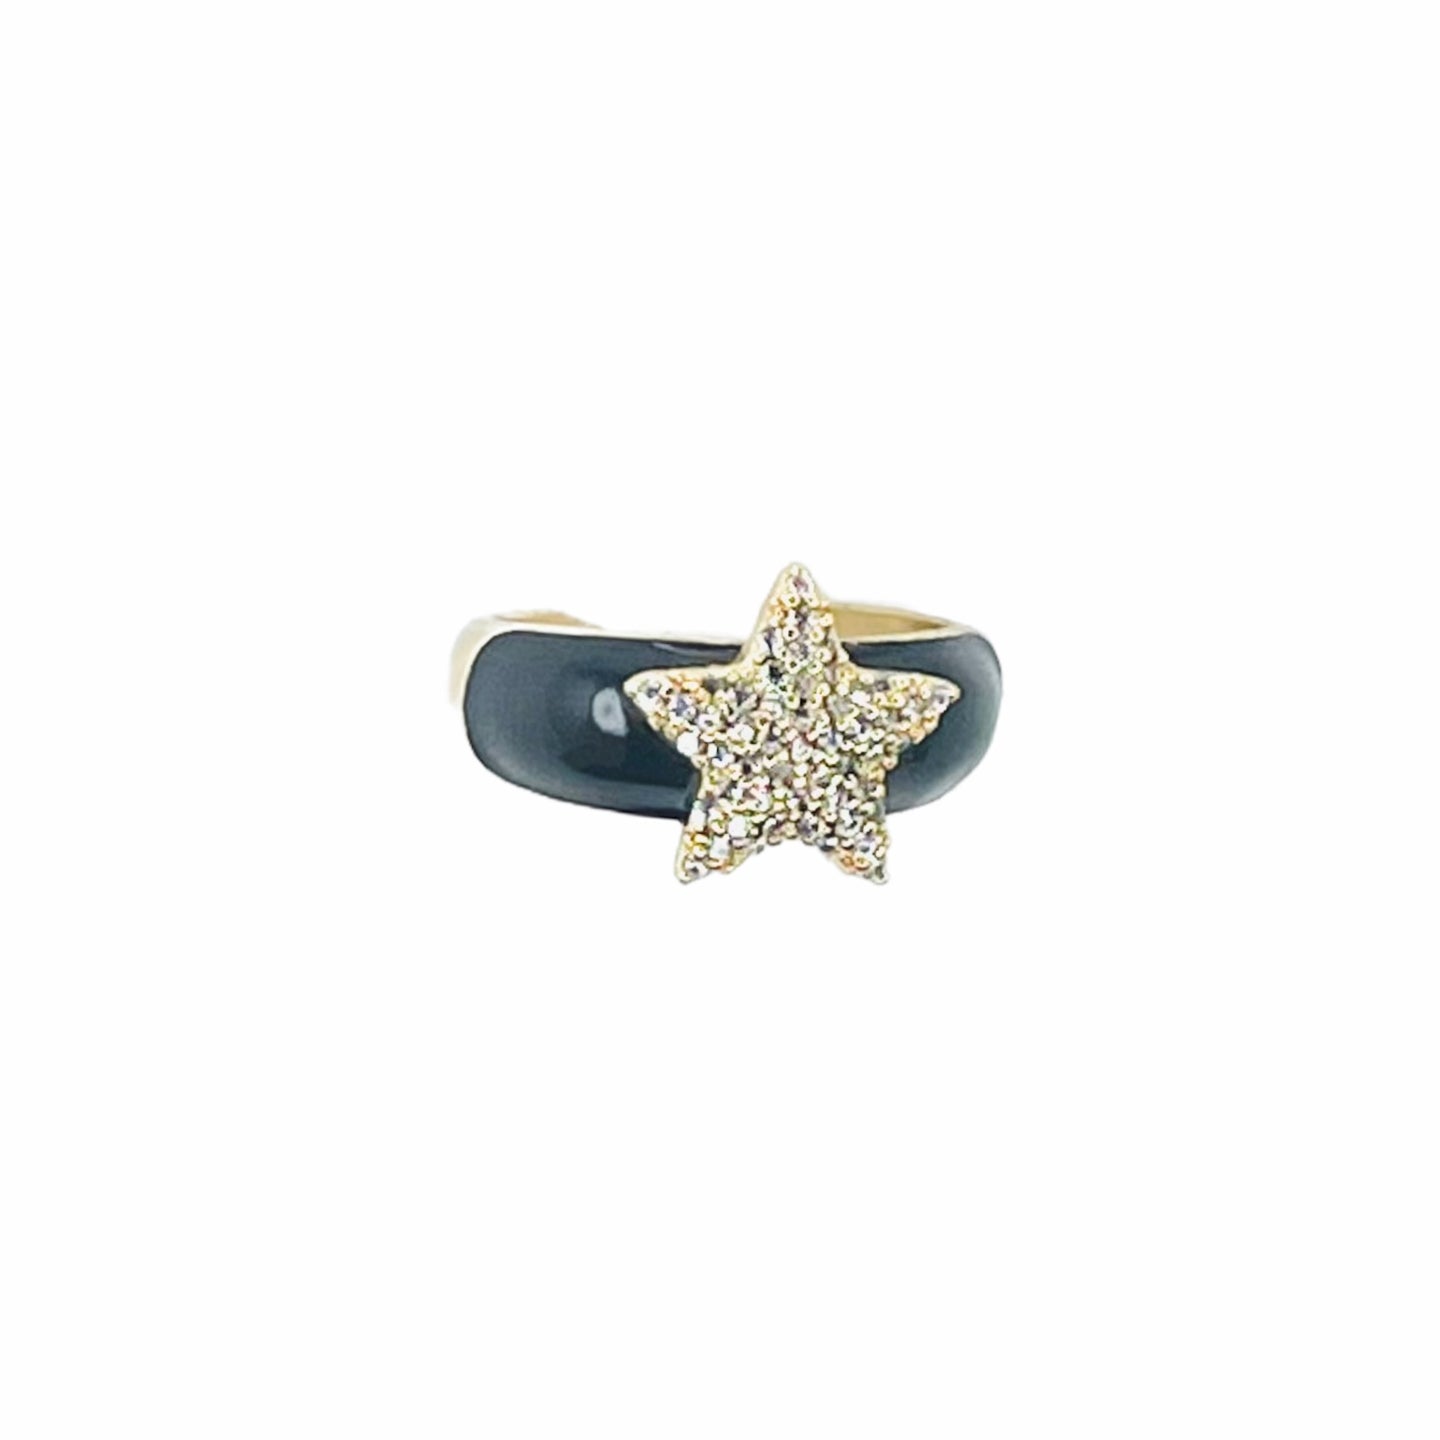 Front View - Black candy star ring. Lucky Birds- The Valerie Collection. 